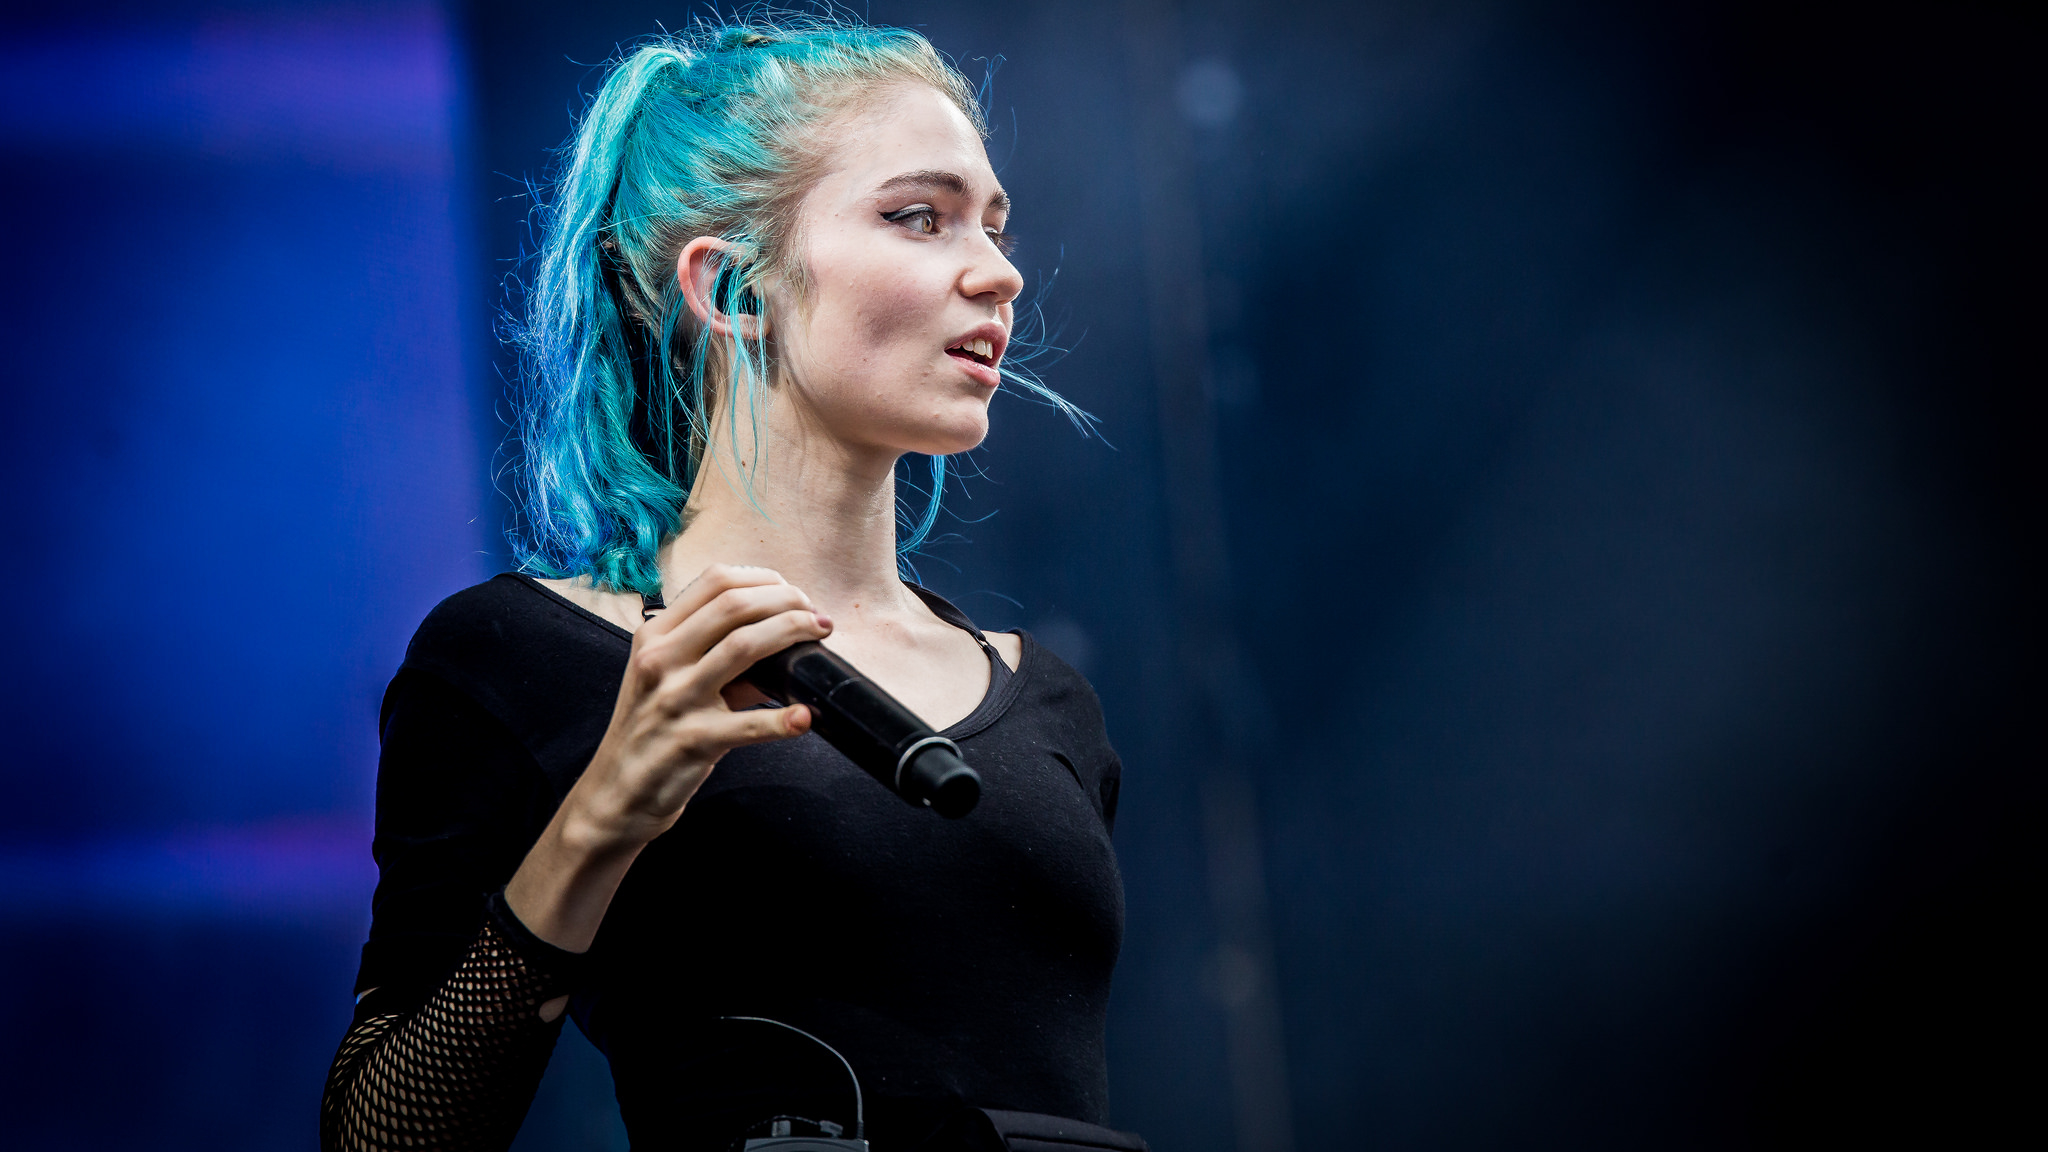 Grimes Full HD Wallpaper and Background Image | 2048x1152 ...